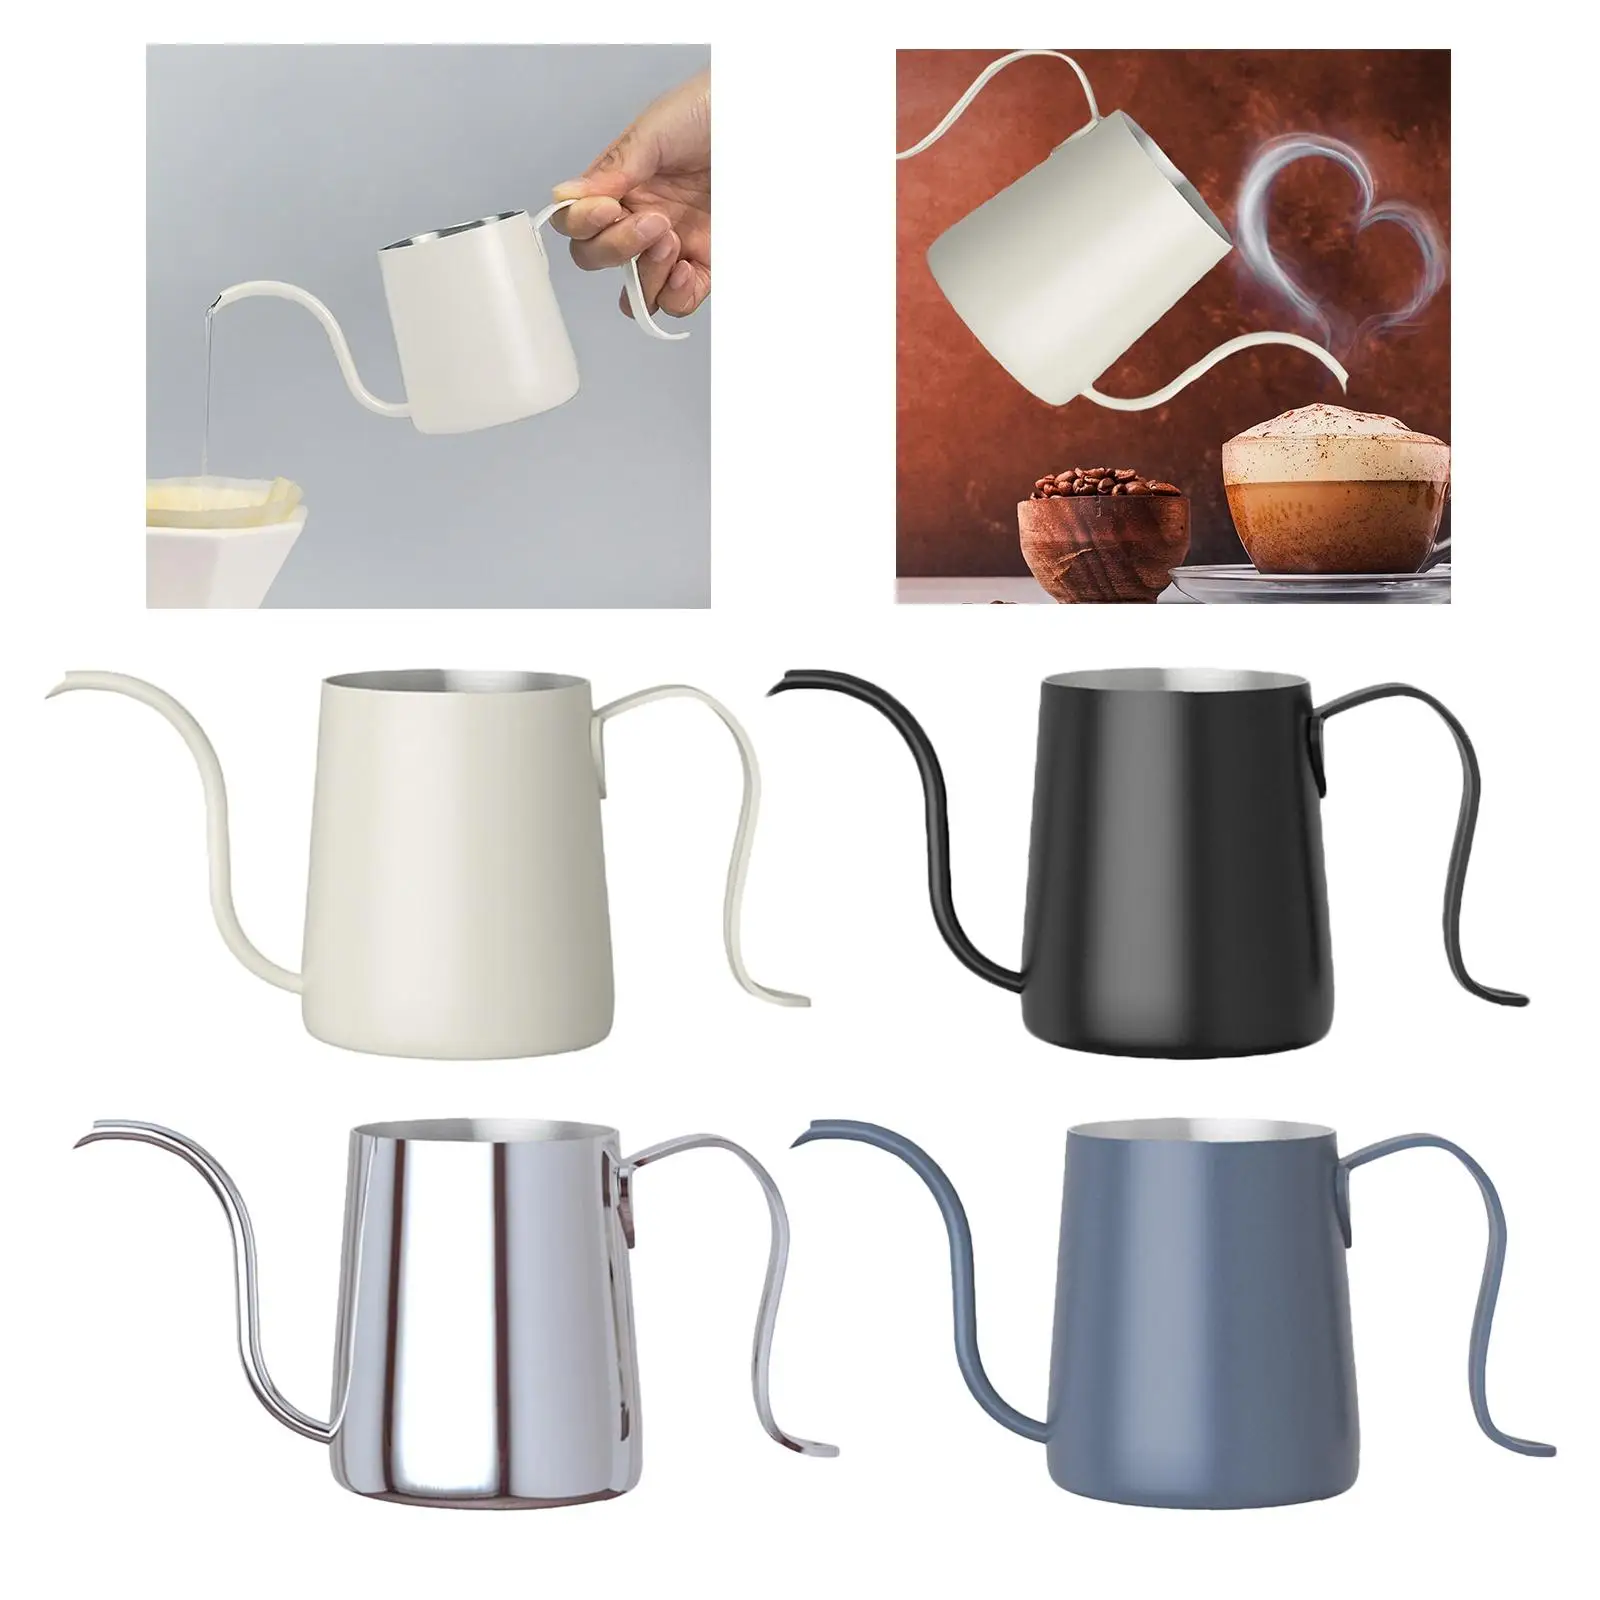 304 Stainless Steel Coffee Tea Pot Long Narrow Spout Coffee Dripper Tea Pot Coffee Pouring Kettle for Cafe Kitchen Home Gifts